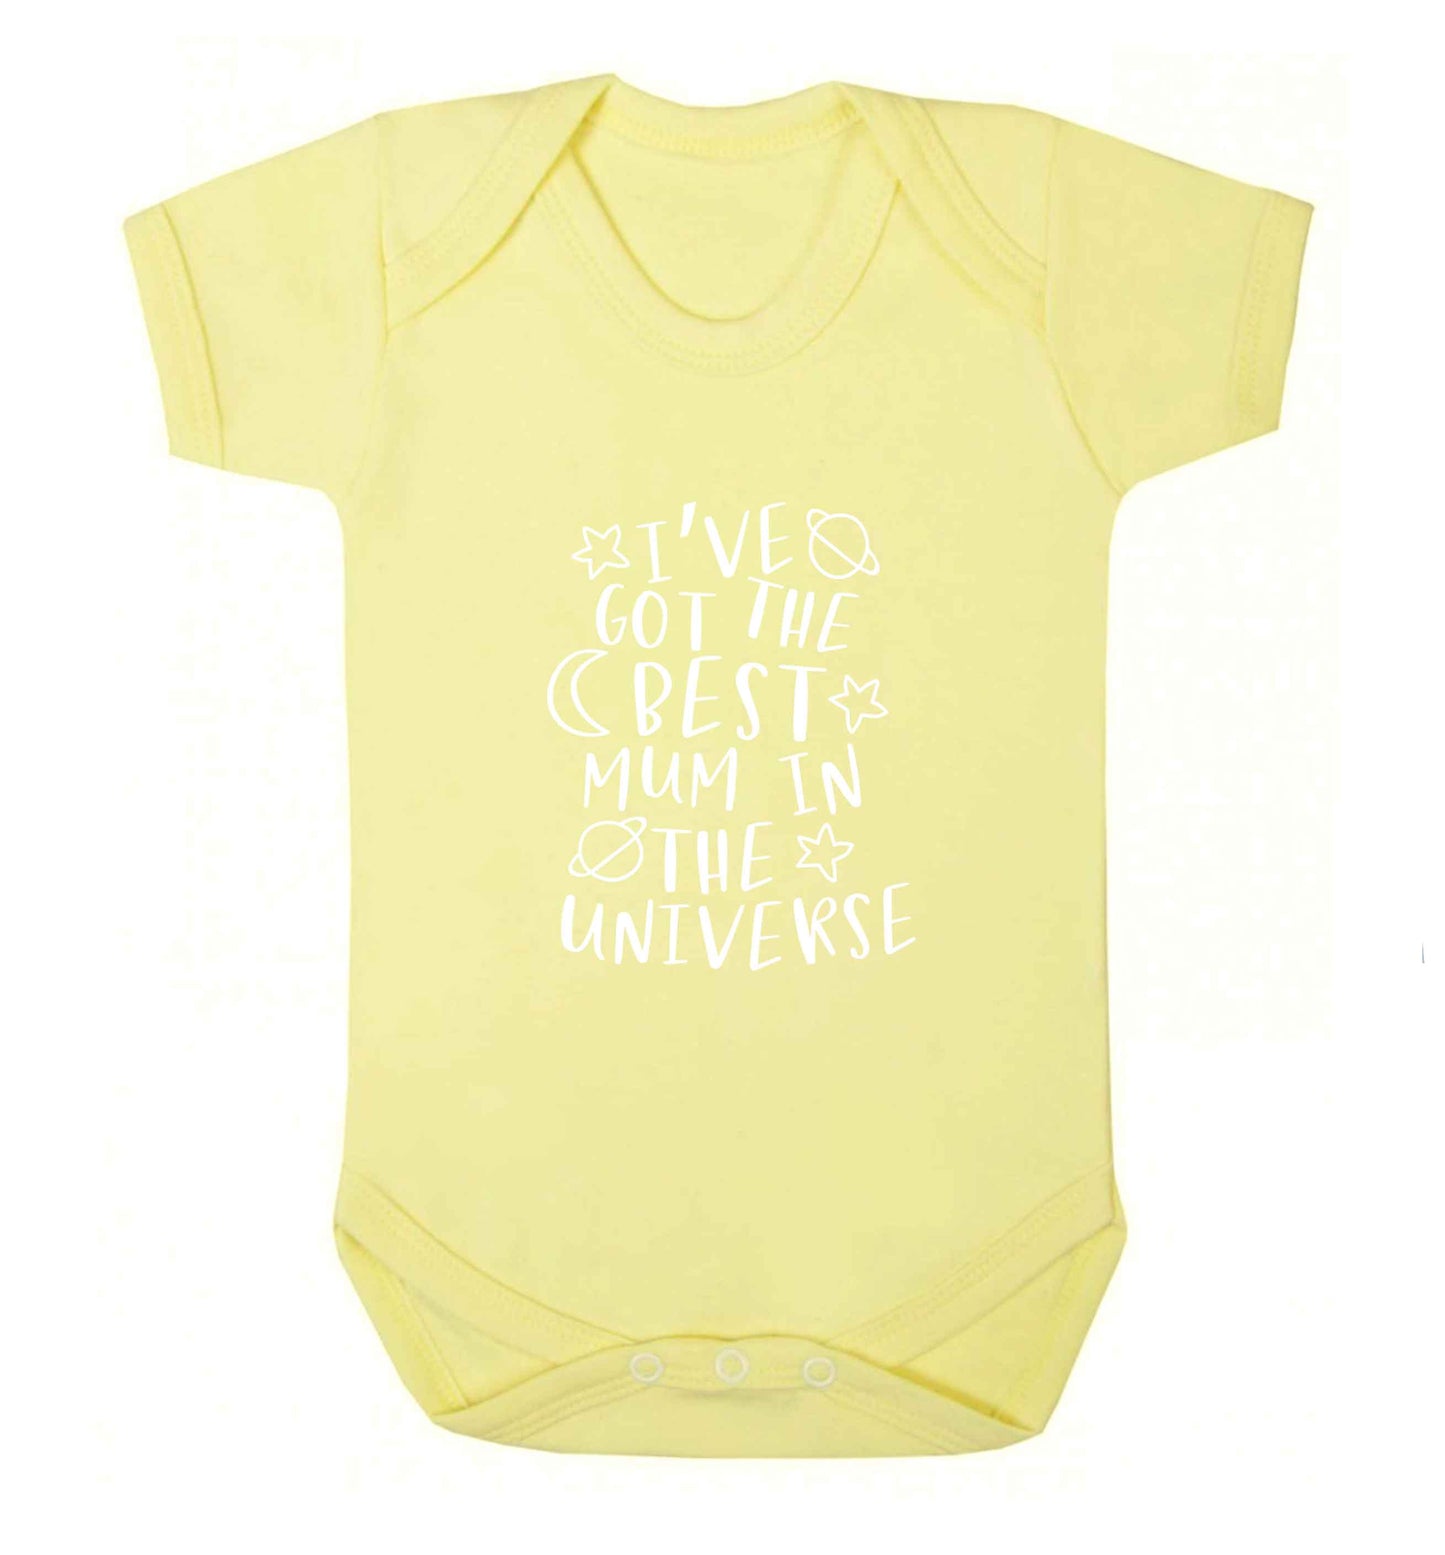 I've got the best mum in the universe baby vest pale yellow 18-24 months